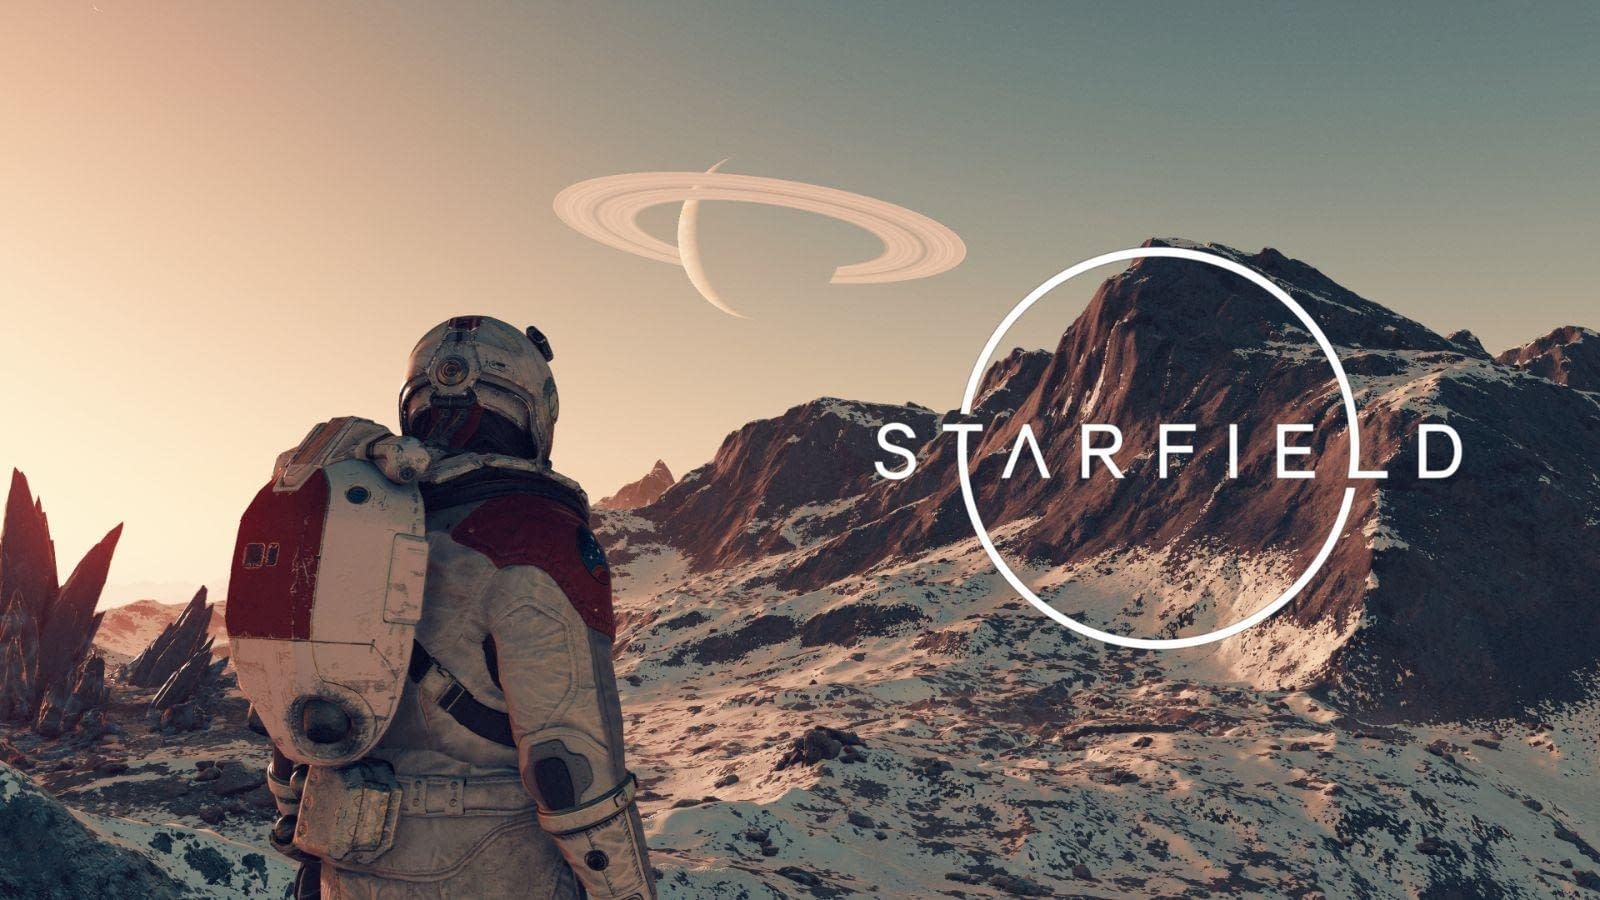 If you buy Starfield on a Platform, you don’t need to take it in the Other